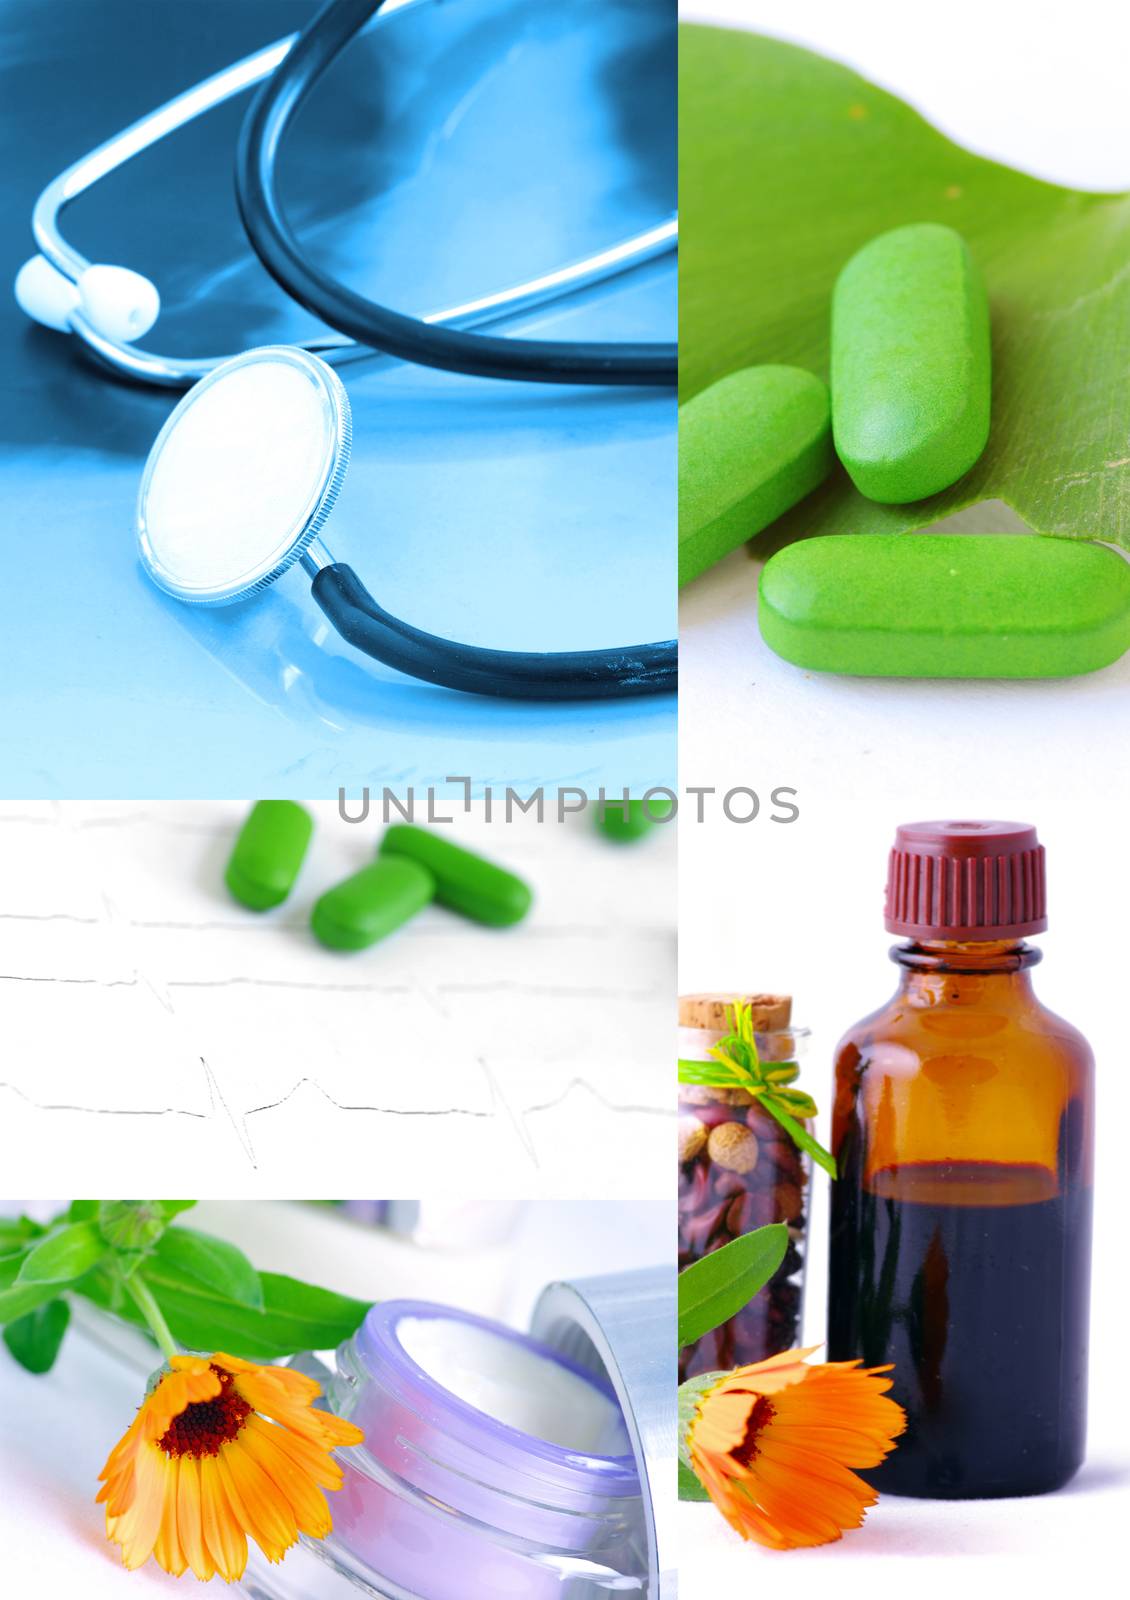 Various homeopathy related images in a collage by dolnikow